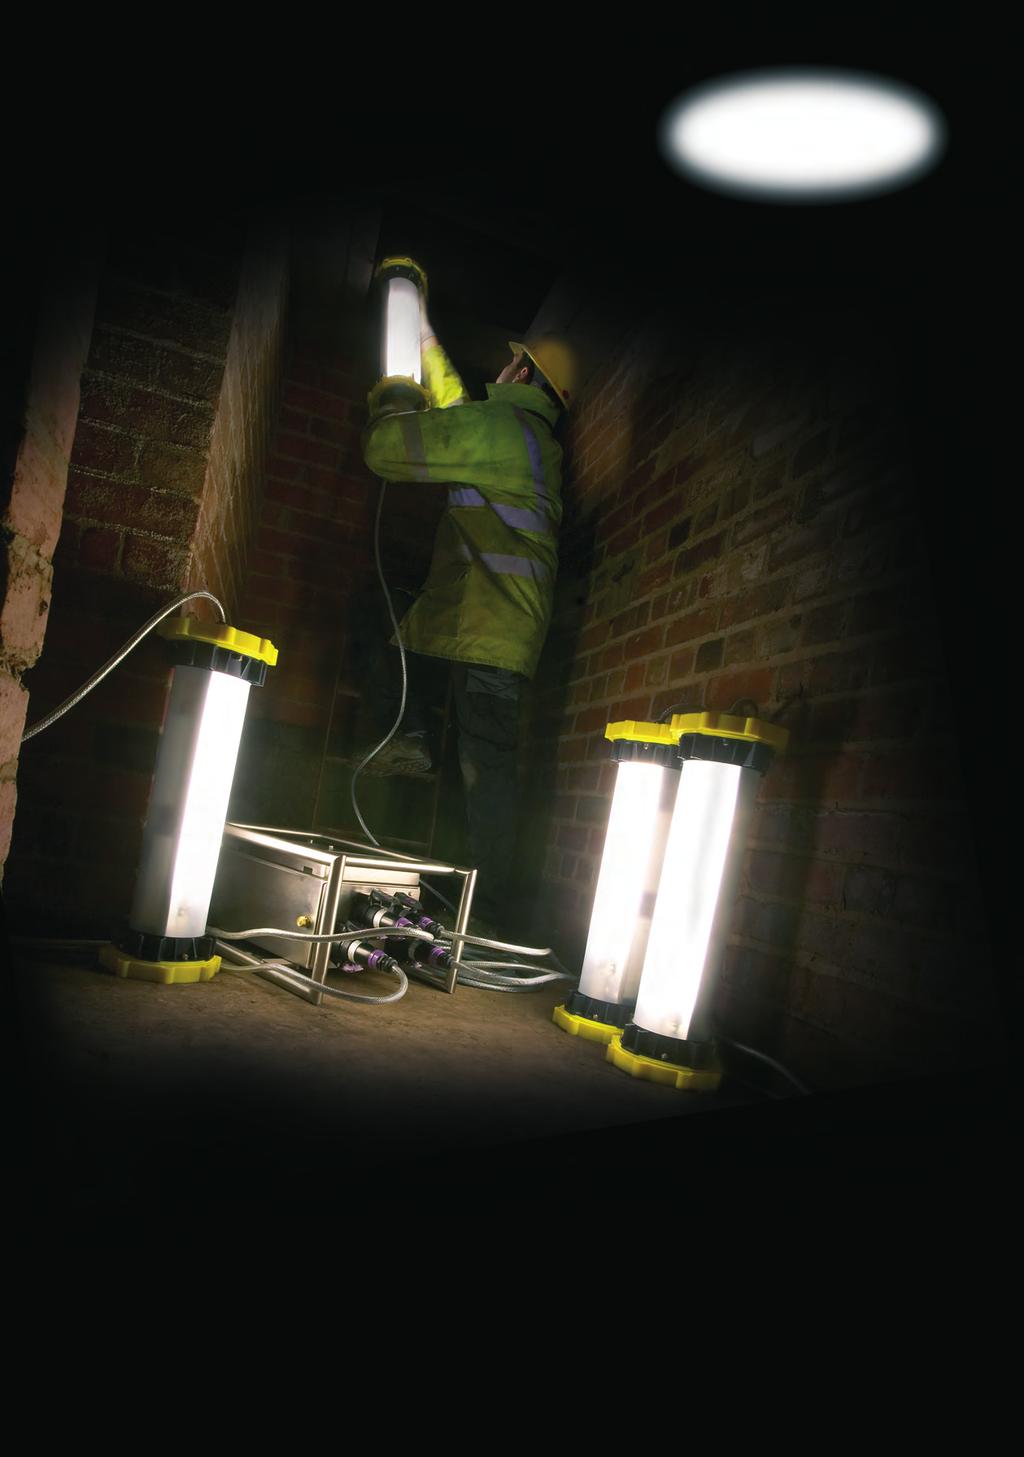 Includes NEW LinkEx LE Wolf Safety Lamp Company The widest range of portable ATEX lighting approved for use in explosive atmospheres Wolf Safety have Ex lighting products for all purposes, the